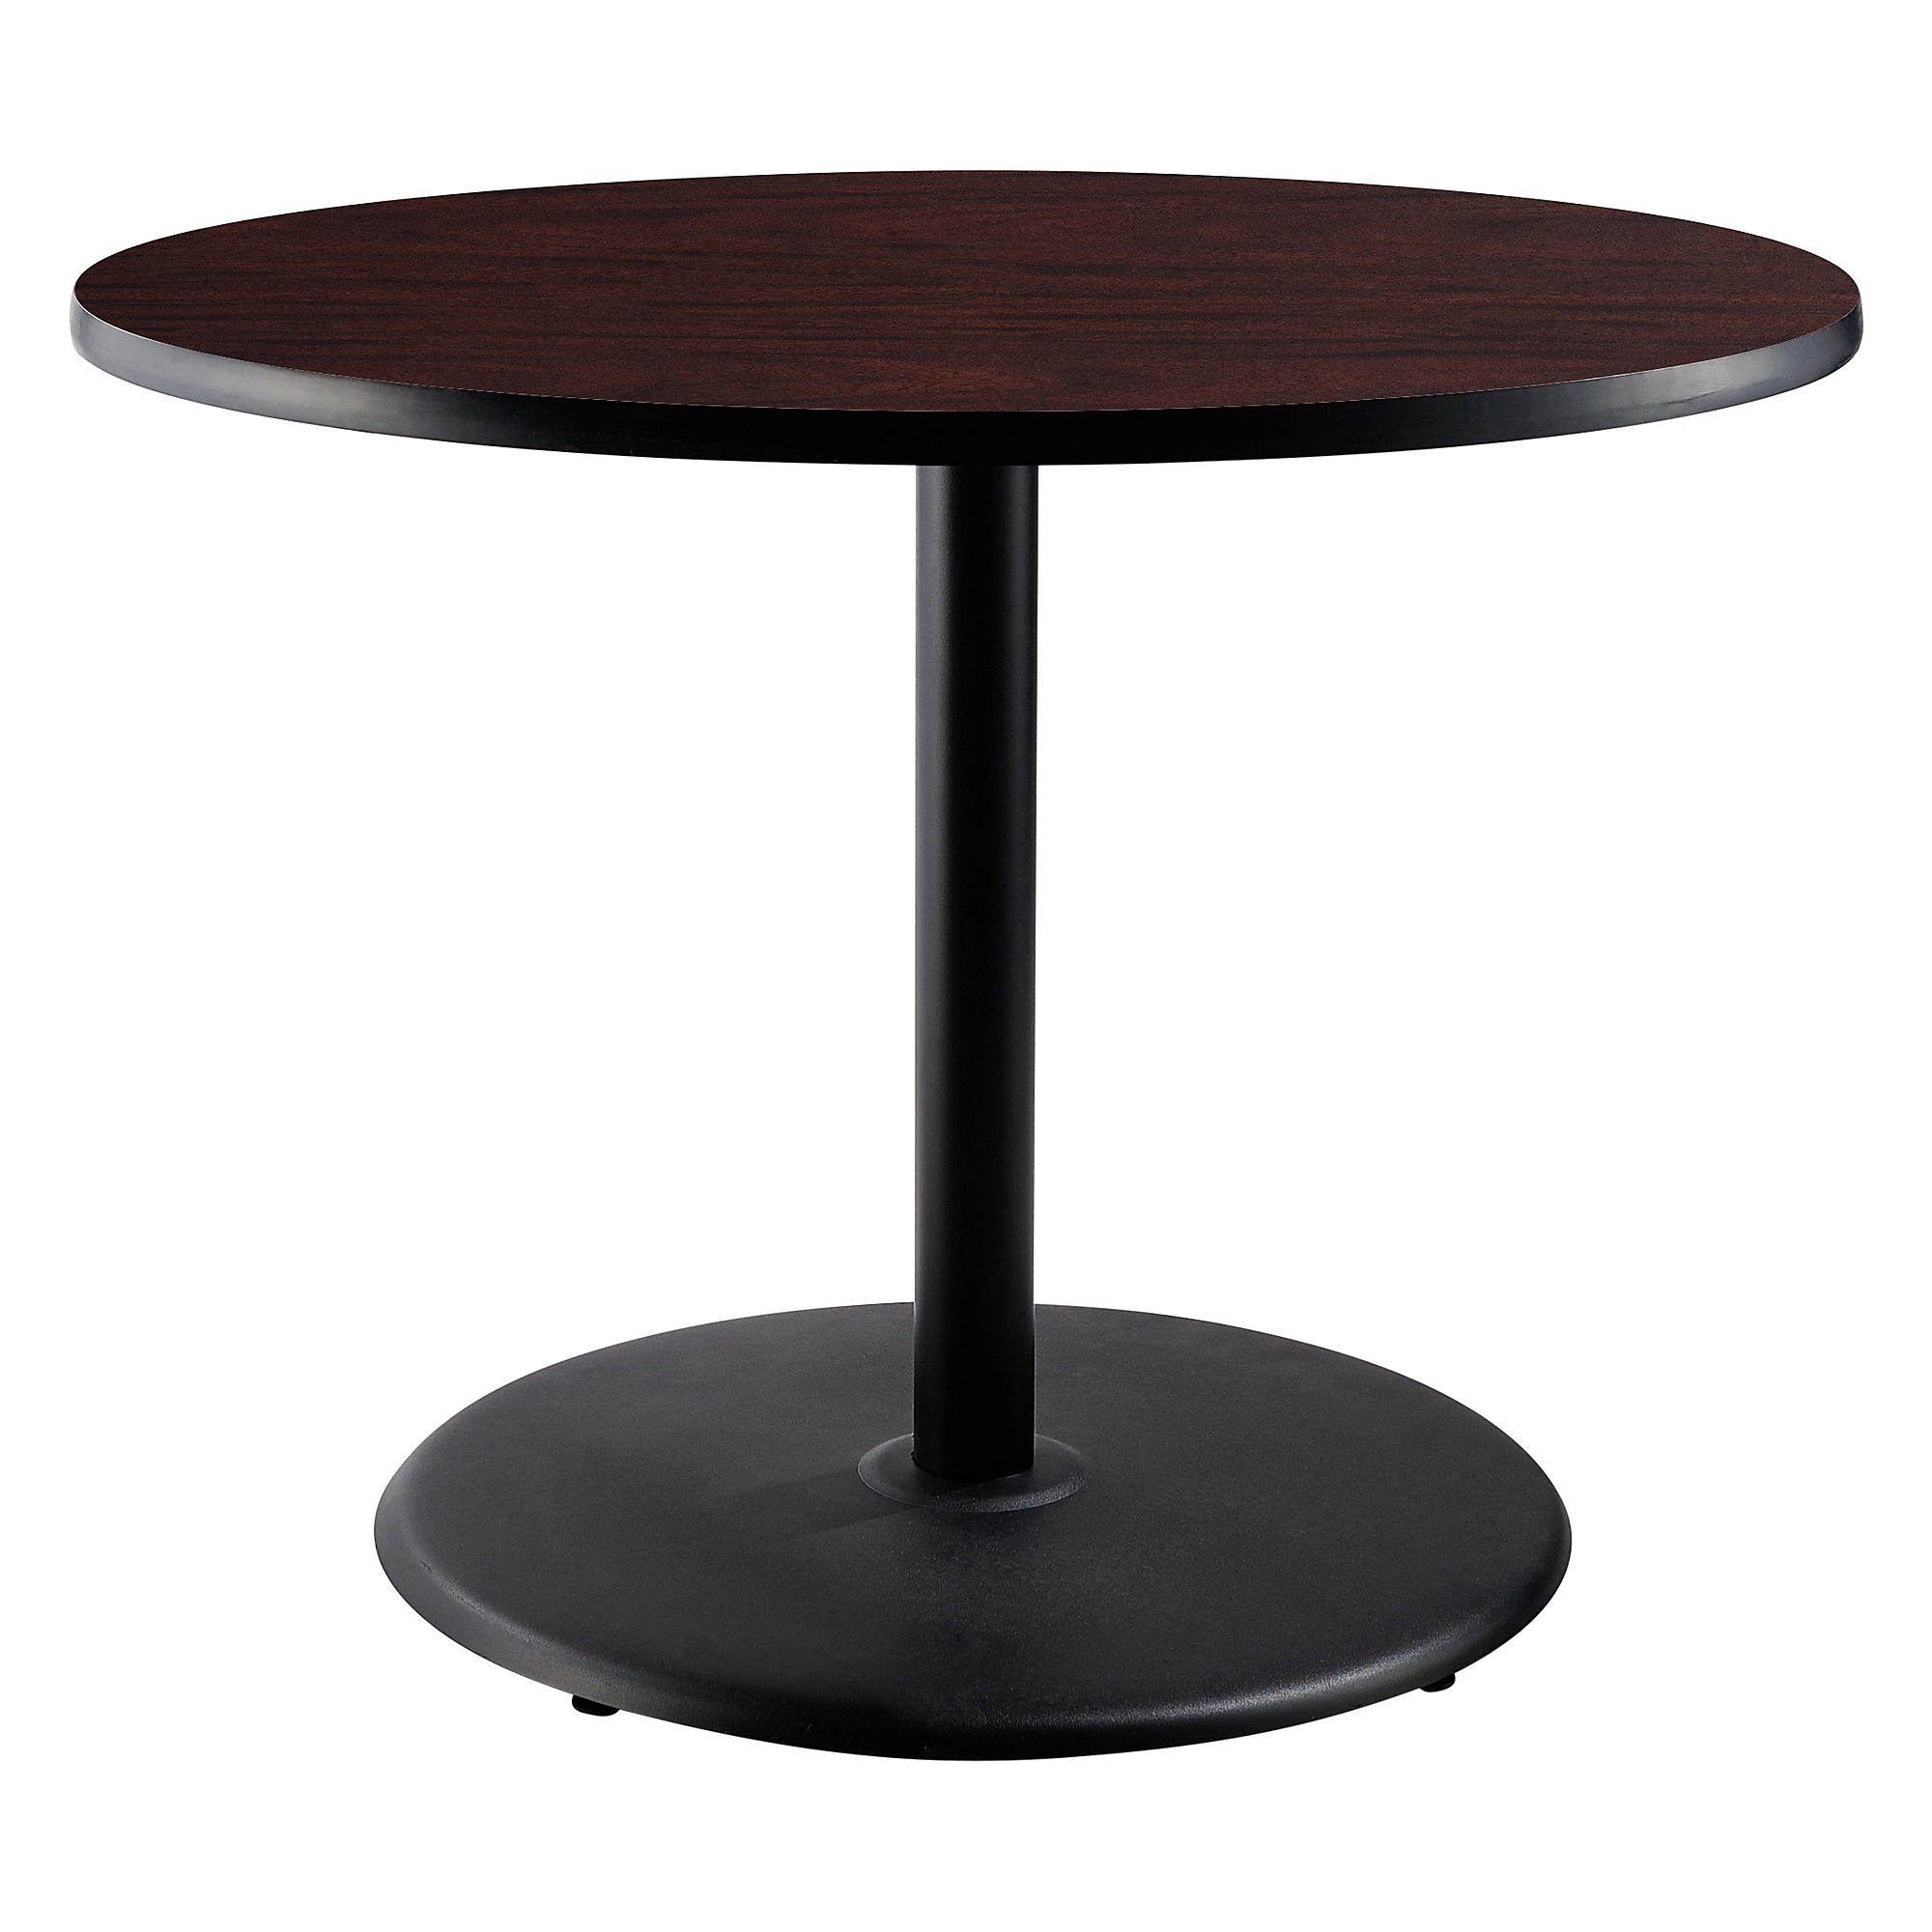 "National Public Seating, Cafe Table, 36x36x30 Round ""R"" Base, Height 30 in, Model CT13636RDPBTMMY"